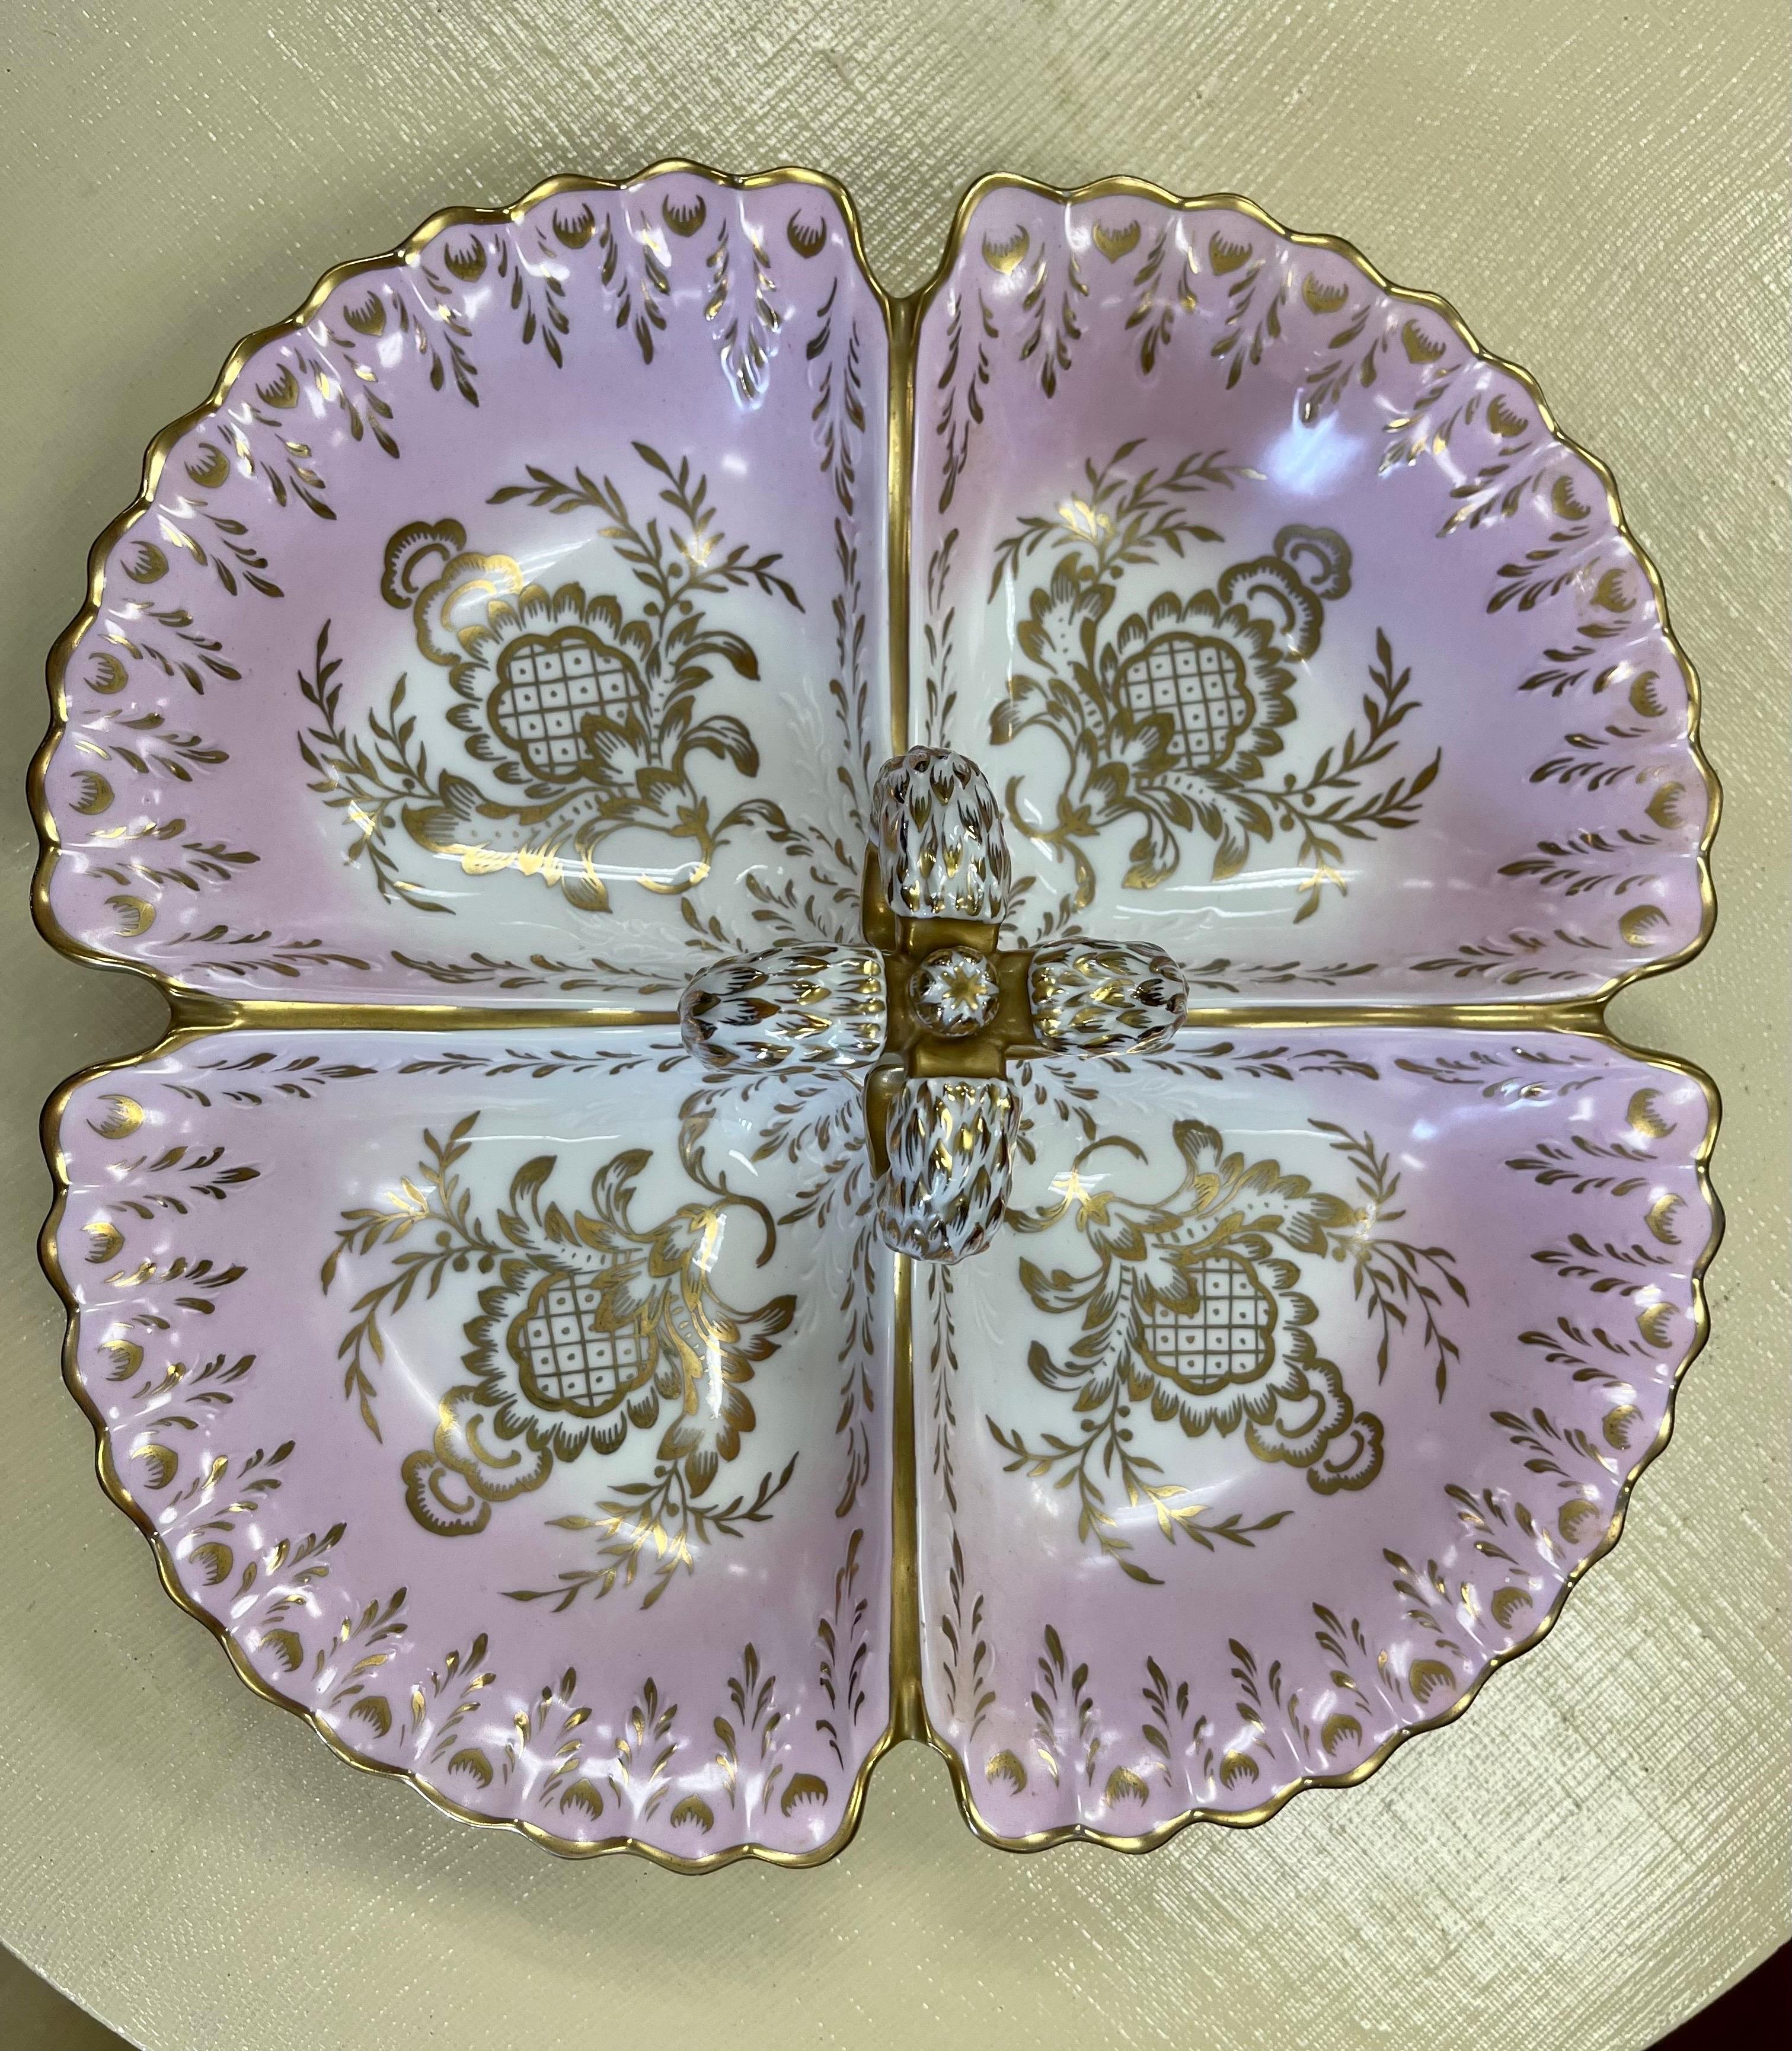 Exceptional, large four part serving platter with raised ribbon handle at center.
Condition is excellent. The colors are vivid and unusual. All hallmarks at bottom, see pics. Circa 1940's. Why not own the best?.